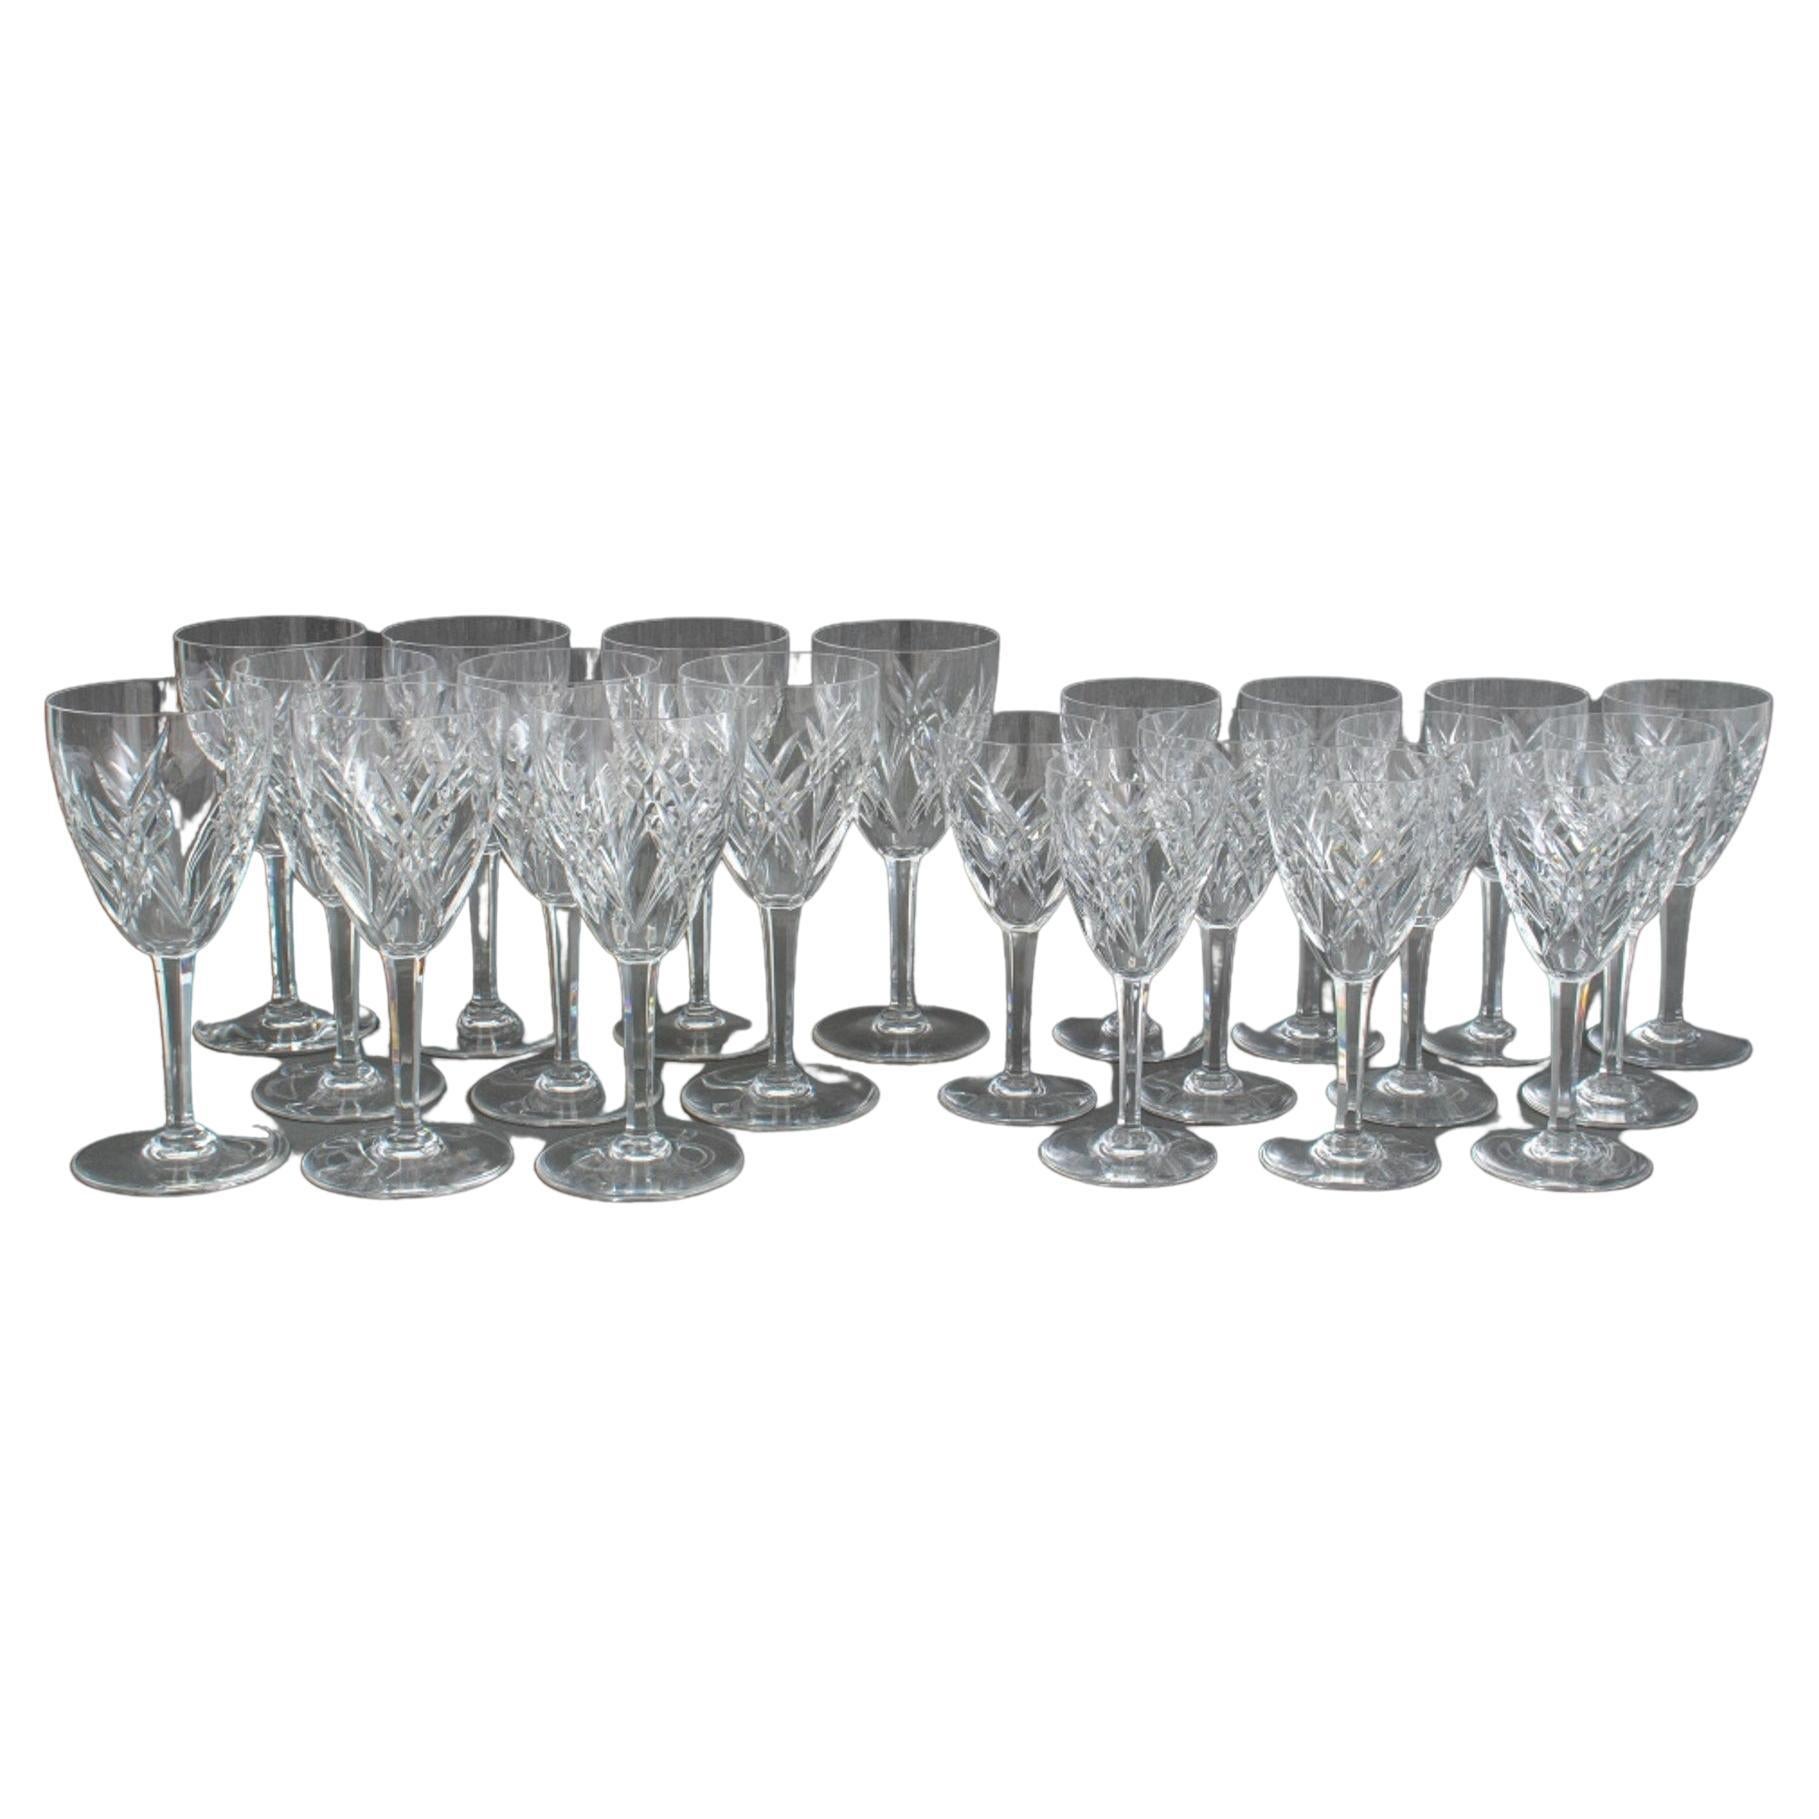 Baccarat assembled set of 21 crystal cut glasses in the 